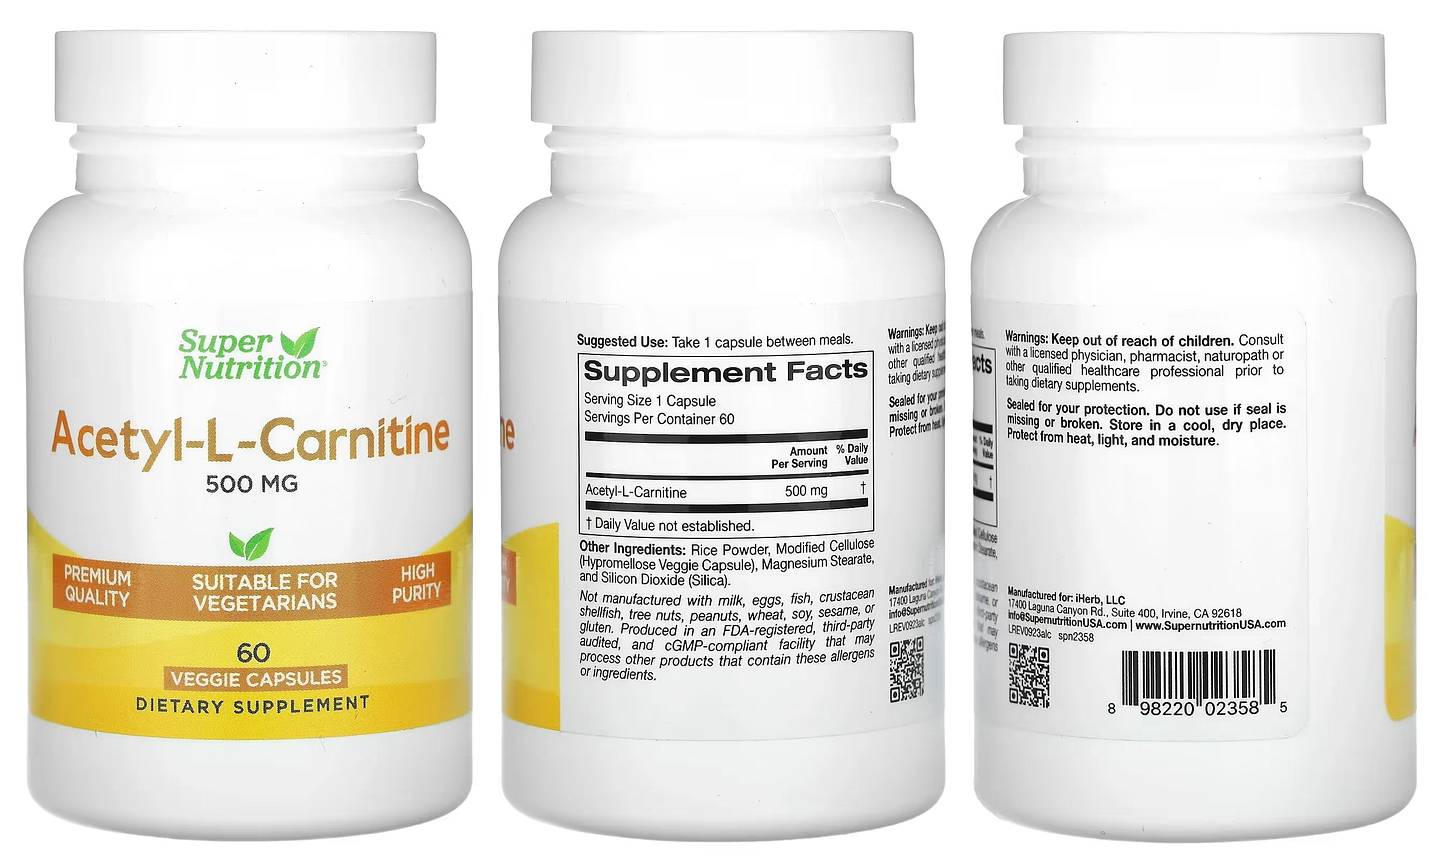 Super Nutrition, Acetyl-L-Carnitine packaging